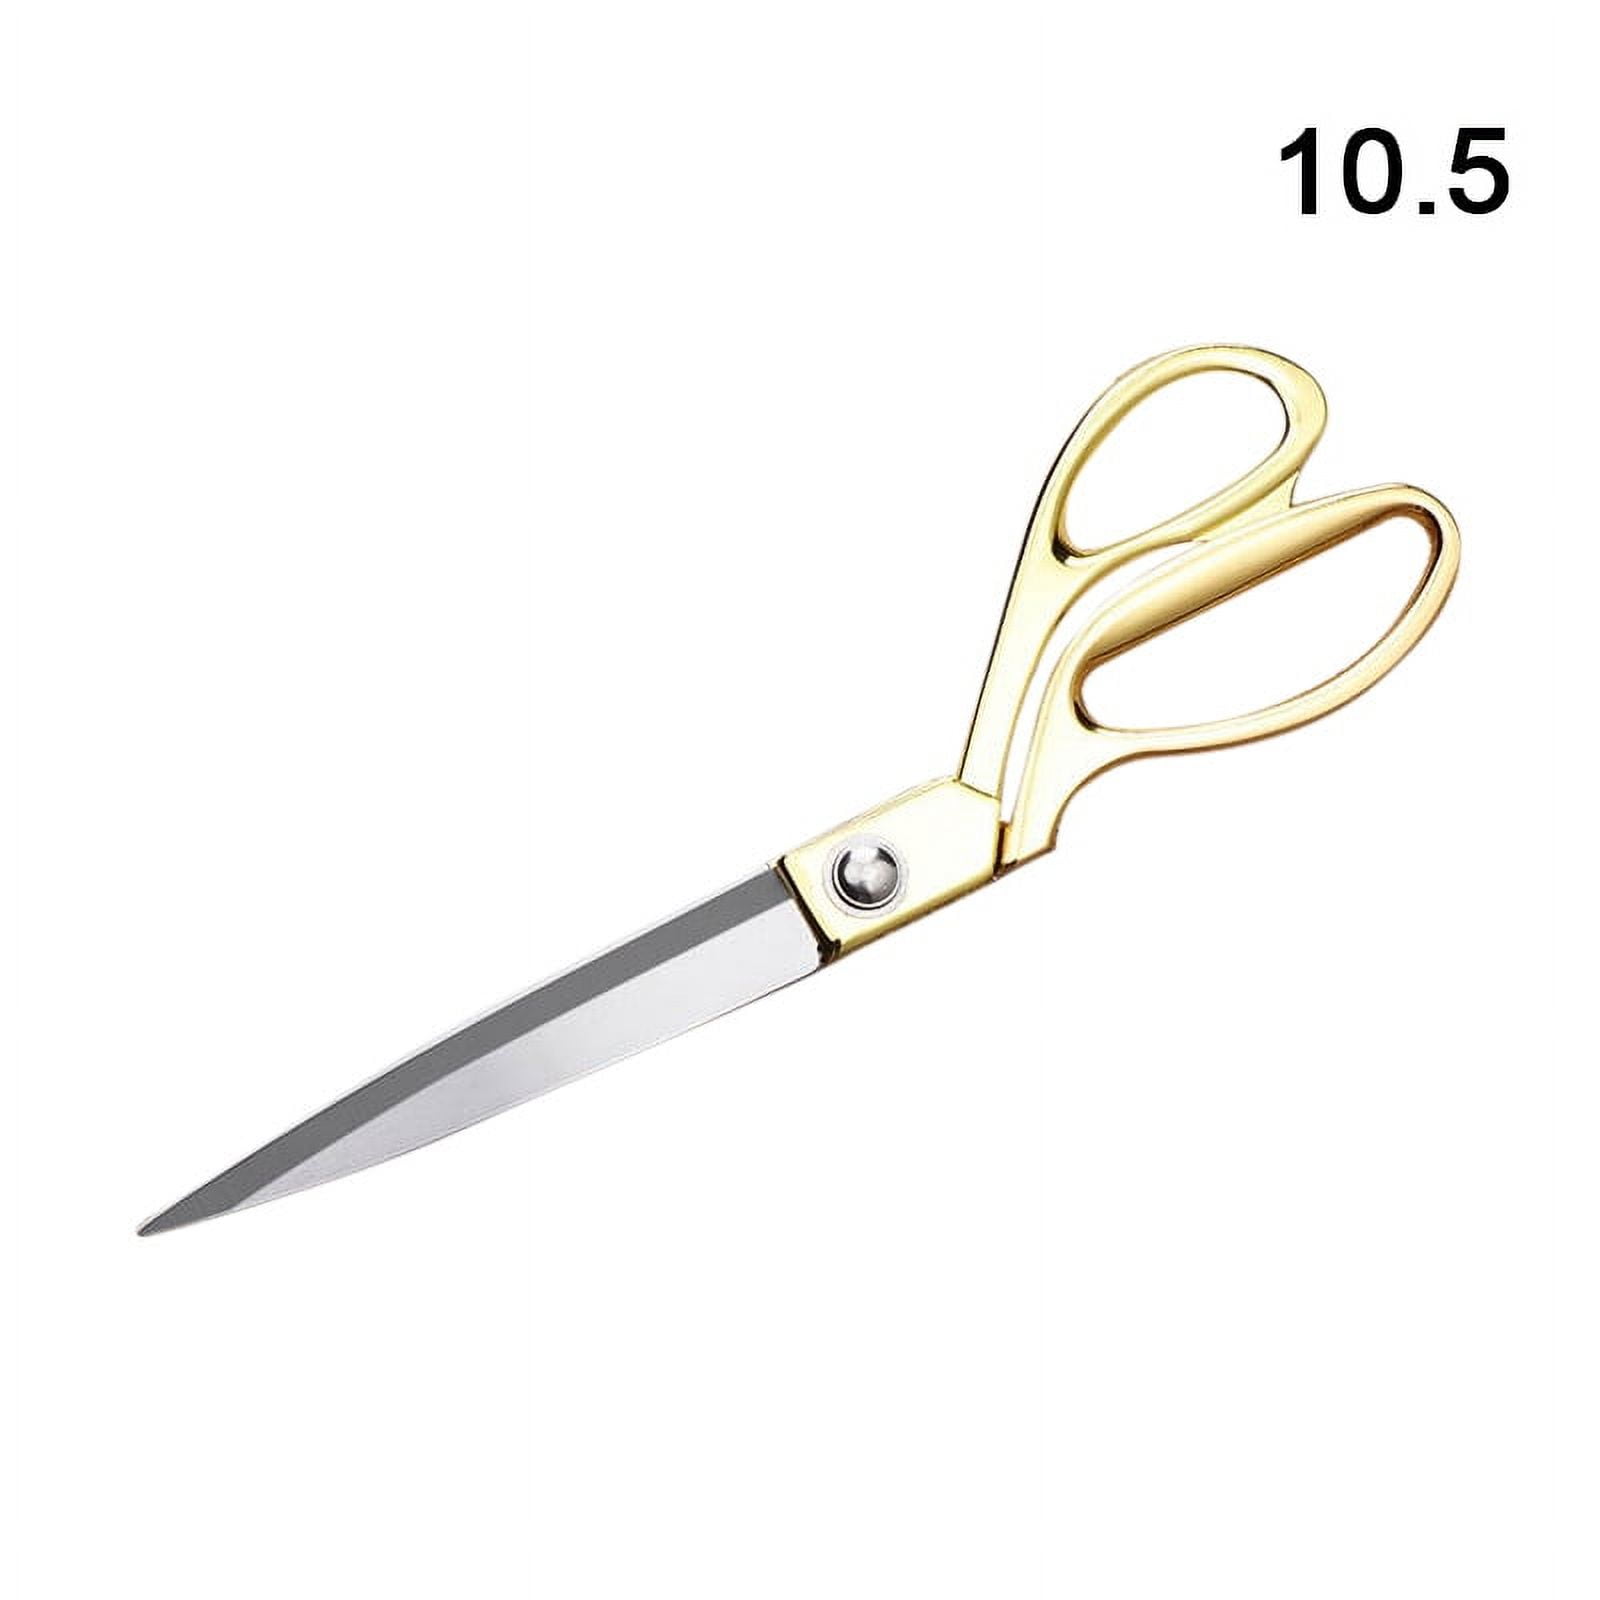  6PCS Mini Scissors, Potable Travel Scissors Thread Trimming  Scissors Small Sewing Shears Pocket Scissors Pointed Tip Scissors Safety  Scissors with Sheath for Cutting Thread Ends or Clothing Tags : Arts, Crafts